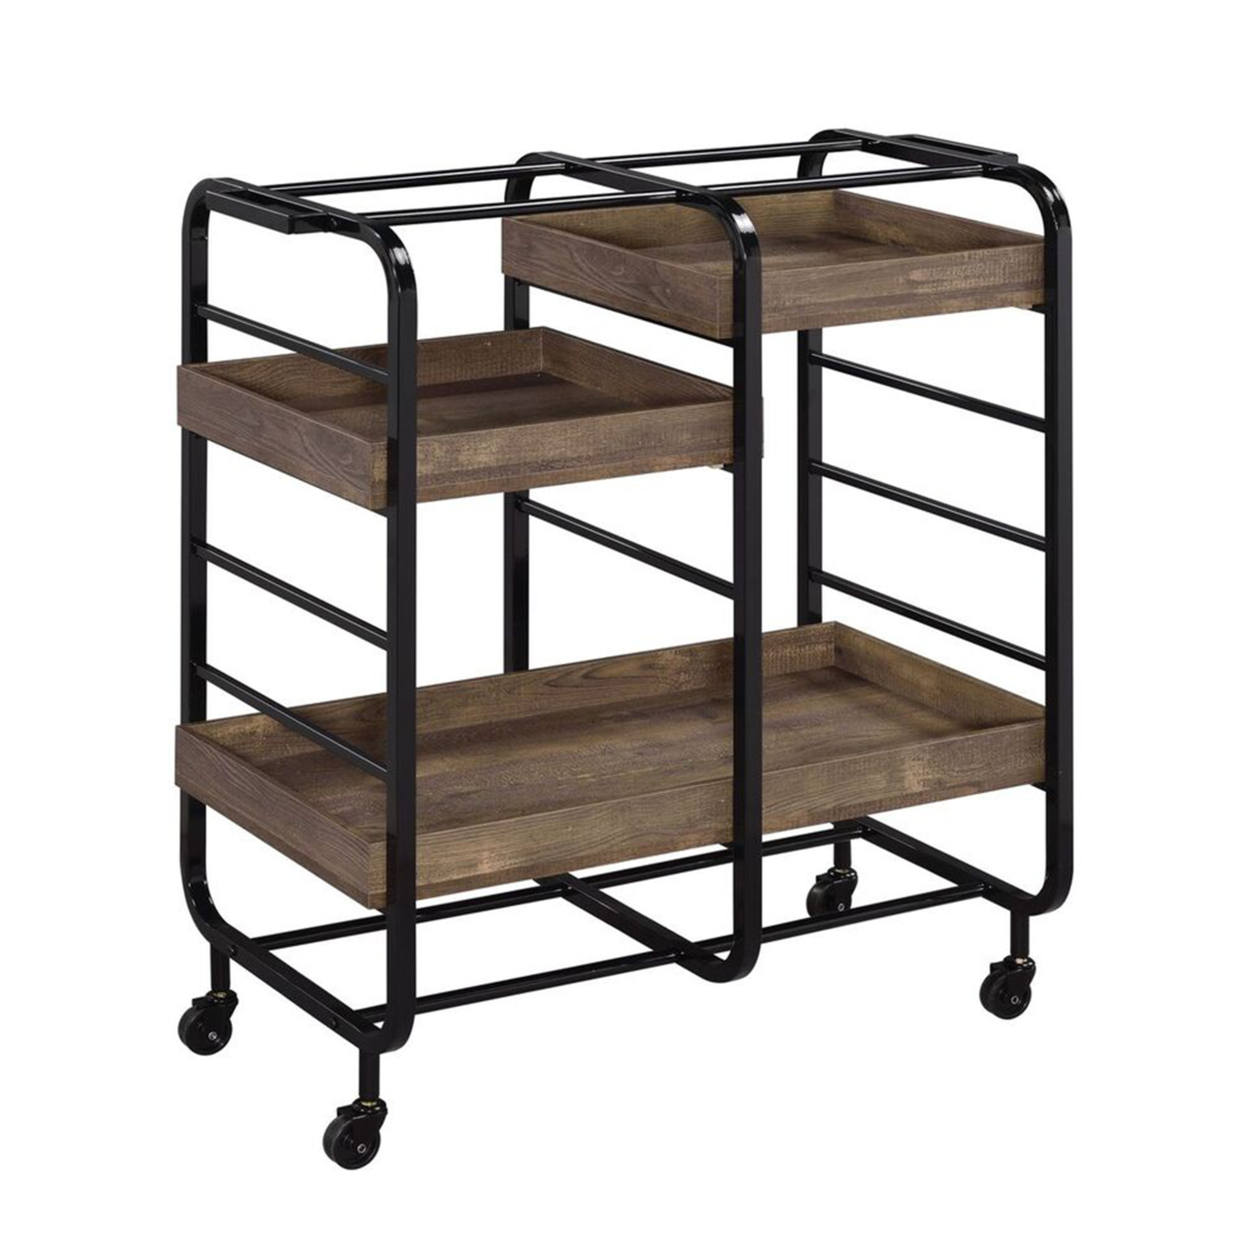 Metal Frame Serving Cart With 3 Open Storage And Casters, Brown And Black- Saltoro Sherpi